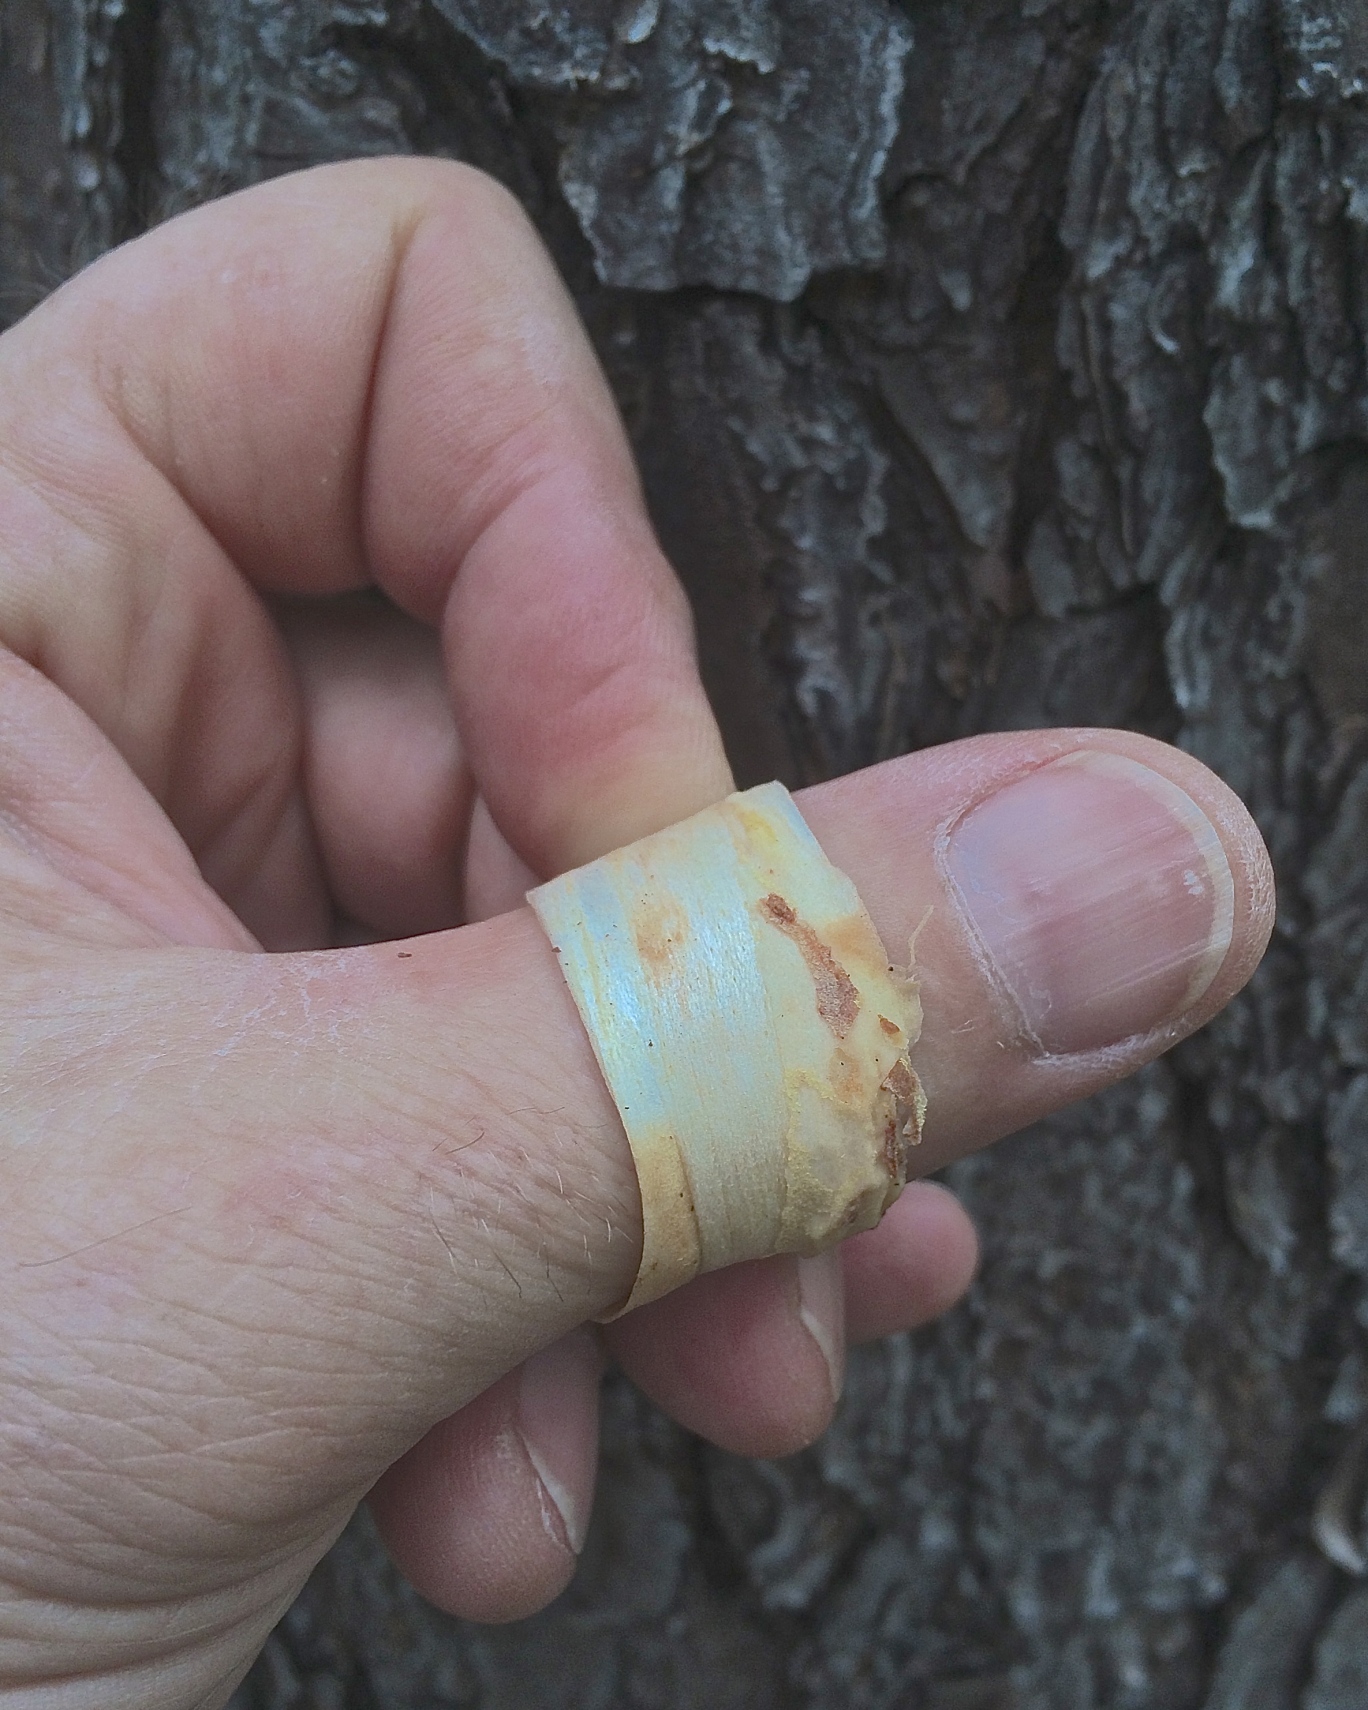 Inner bark Band Aid from the pine tree